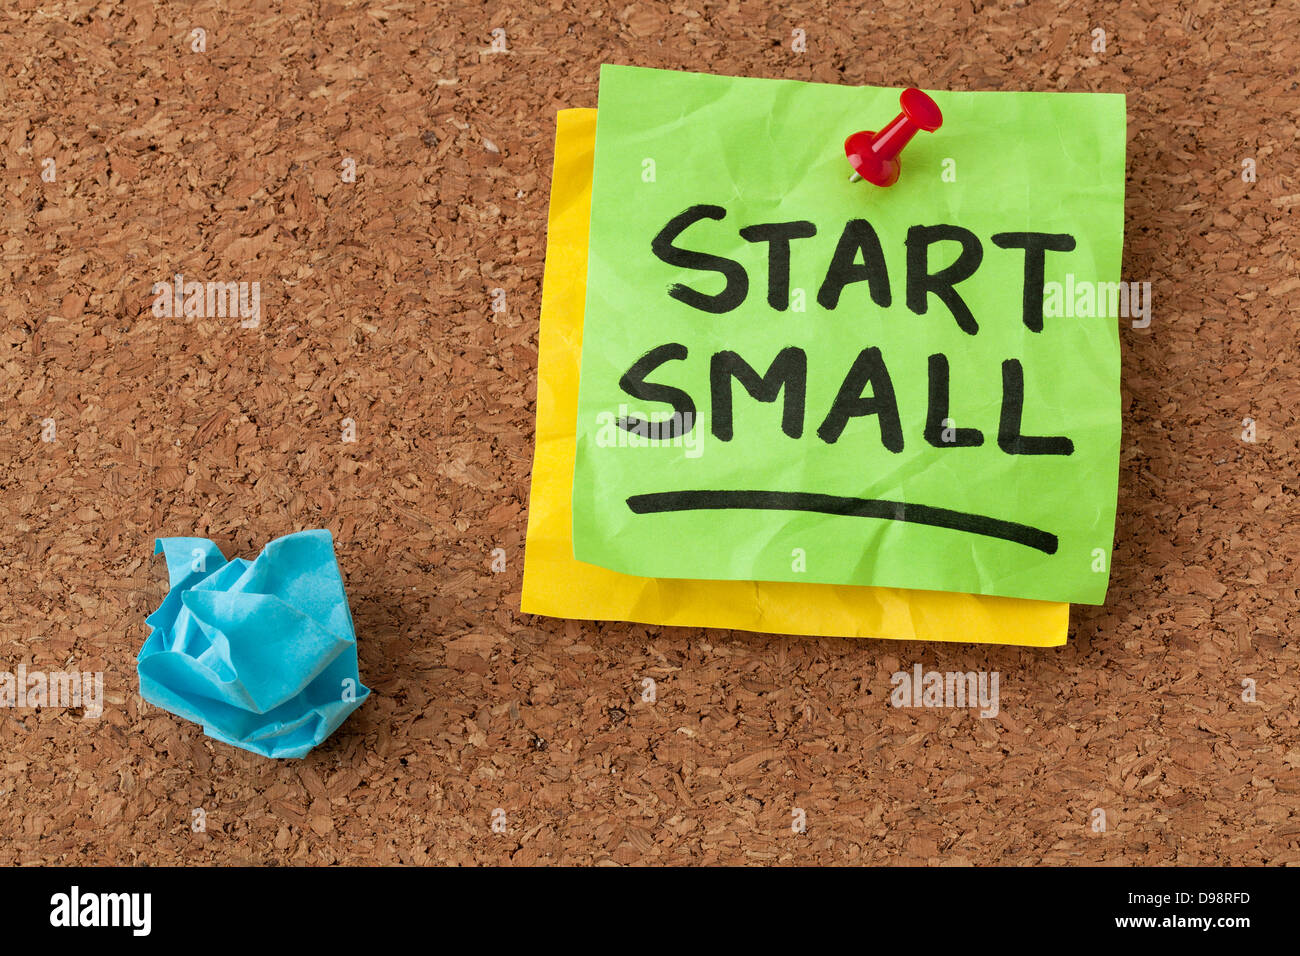 start small - business advice - handwriting on green sticky note Stock Photo